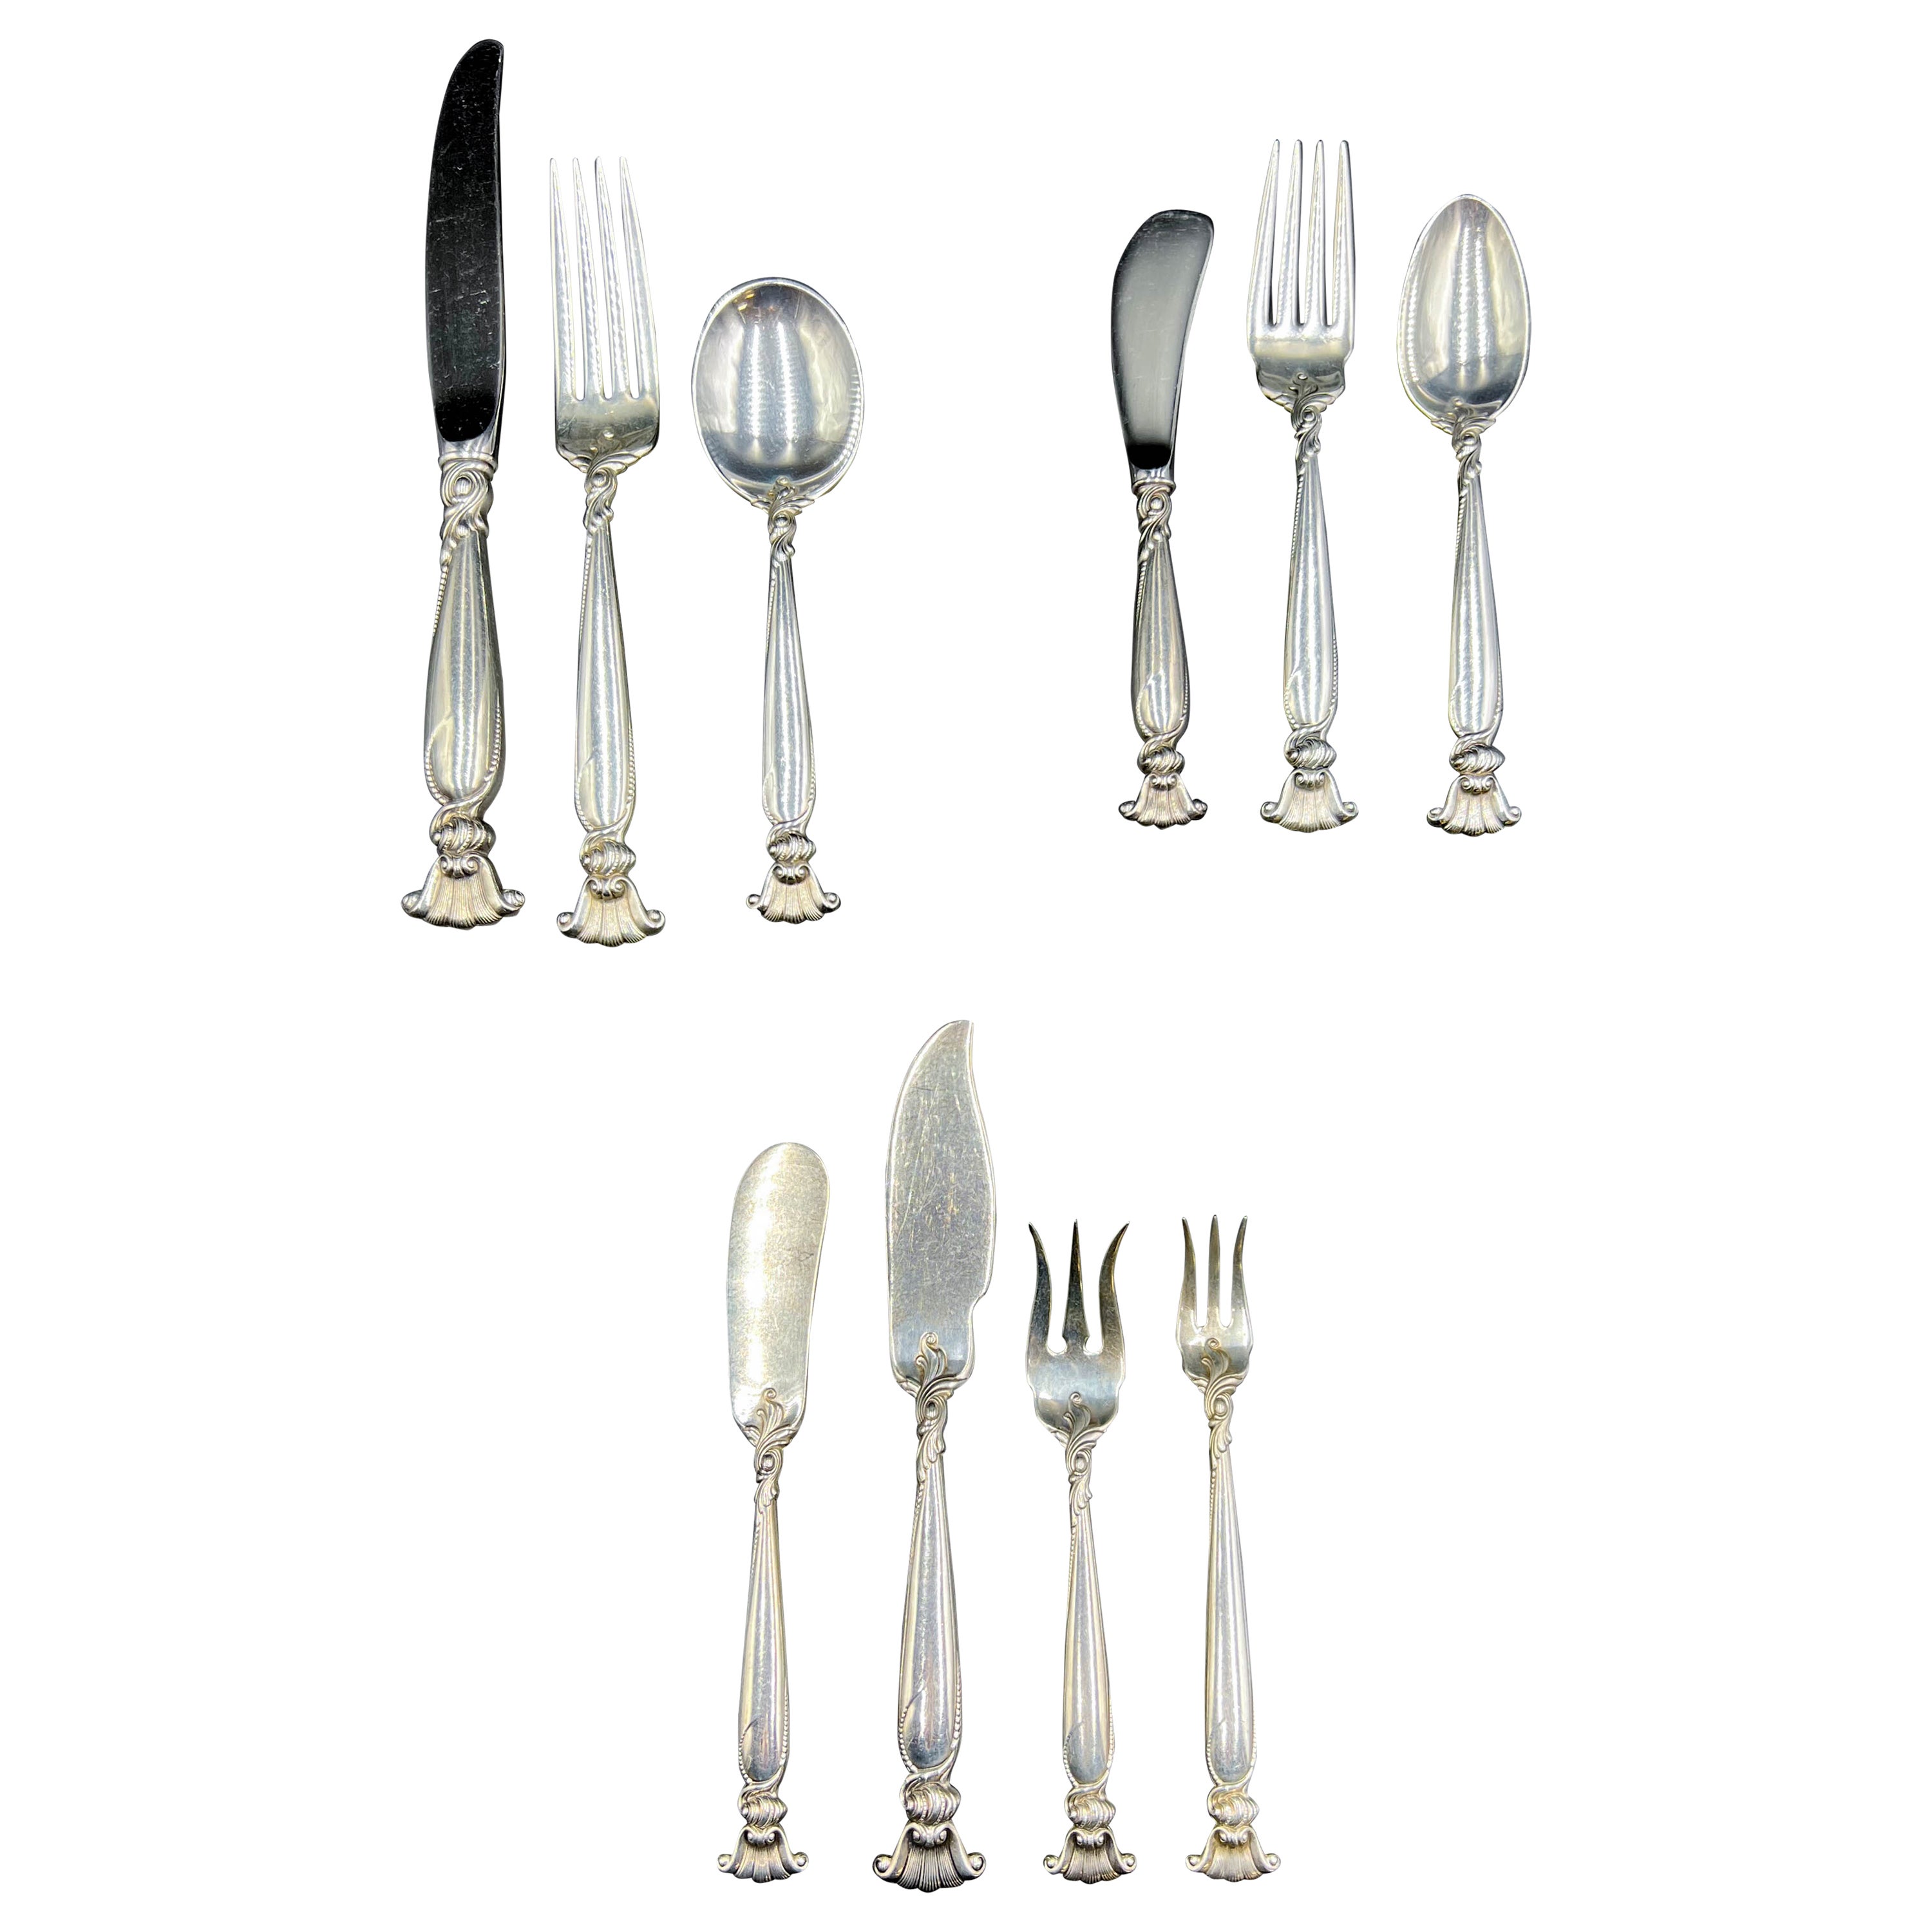 Wallace Sterling Silver Flatware Set, 98 Pieces "Romance of the Sea" For Sale